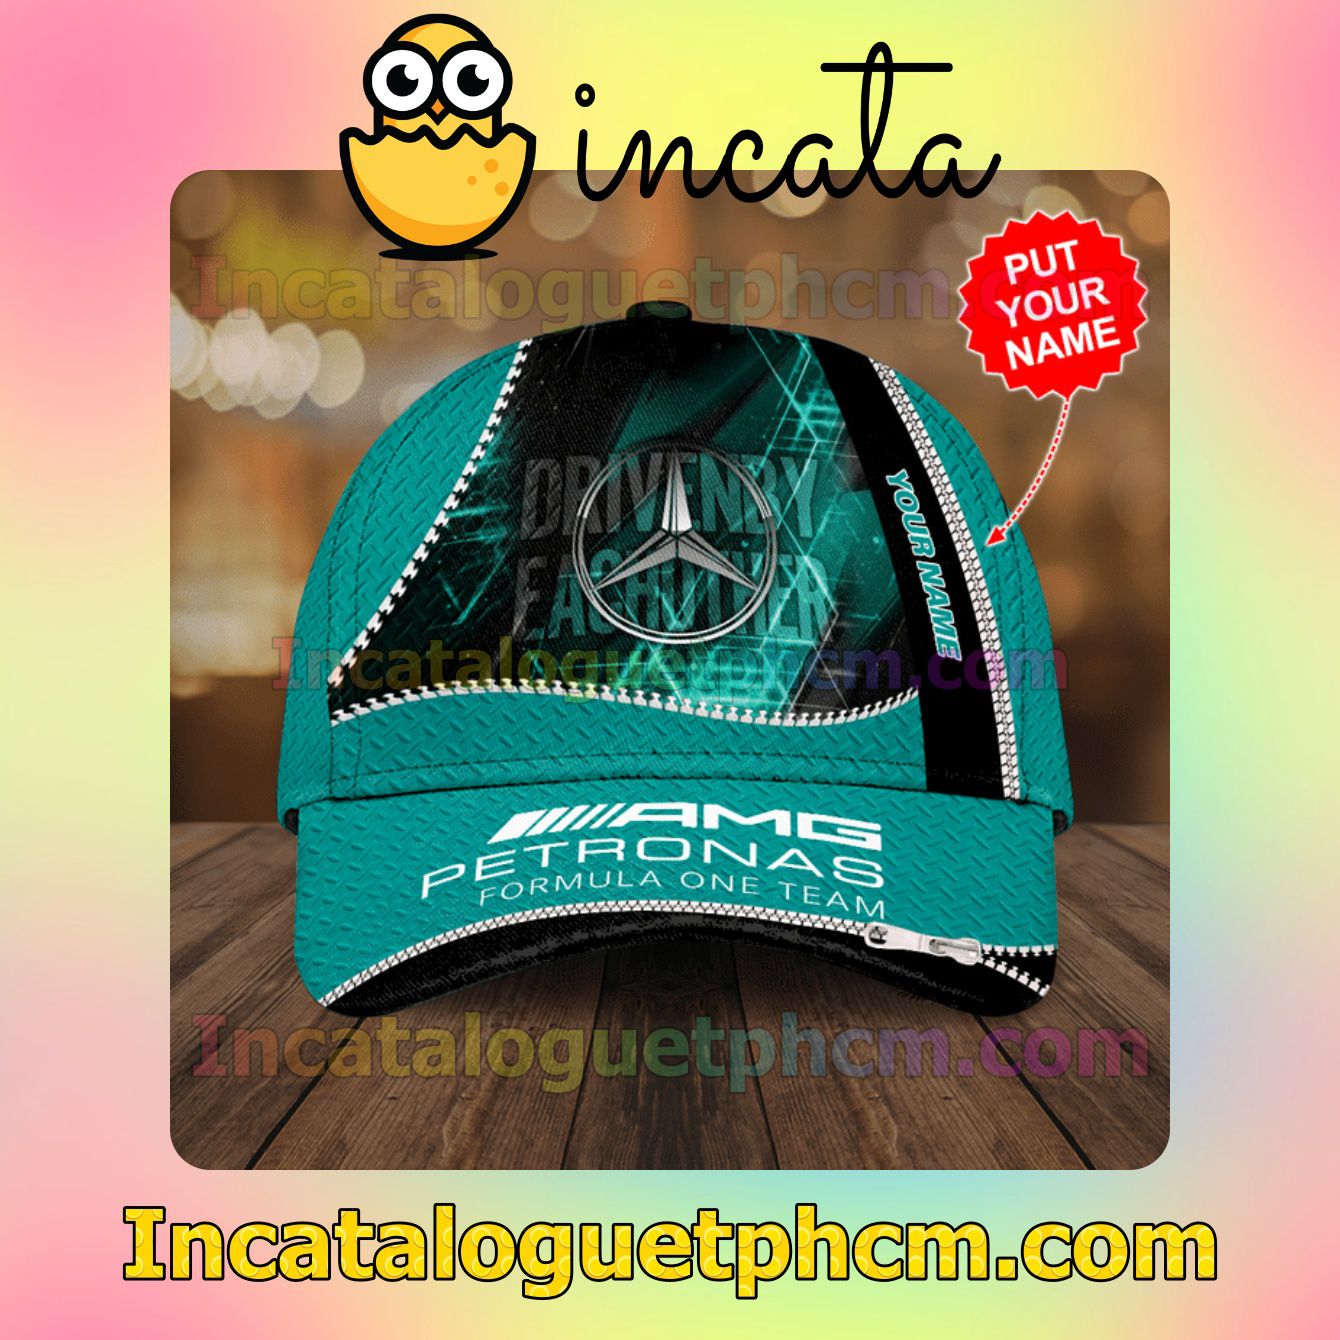 Limited Edition Personalized Mercedes Amg Petronas Formula One Team Driven By Each Other Classic Hat Caps Gift For Men